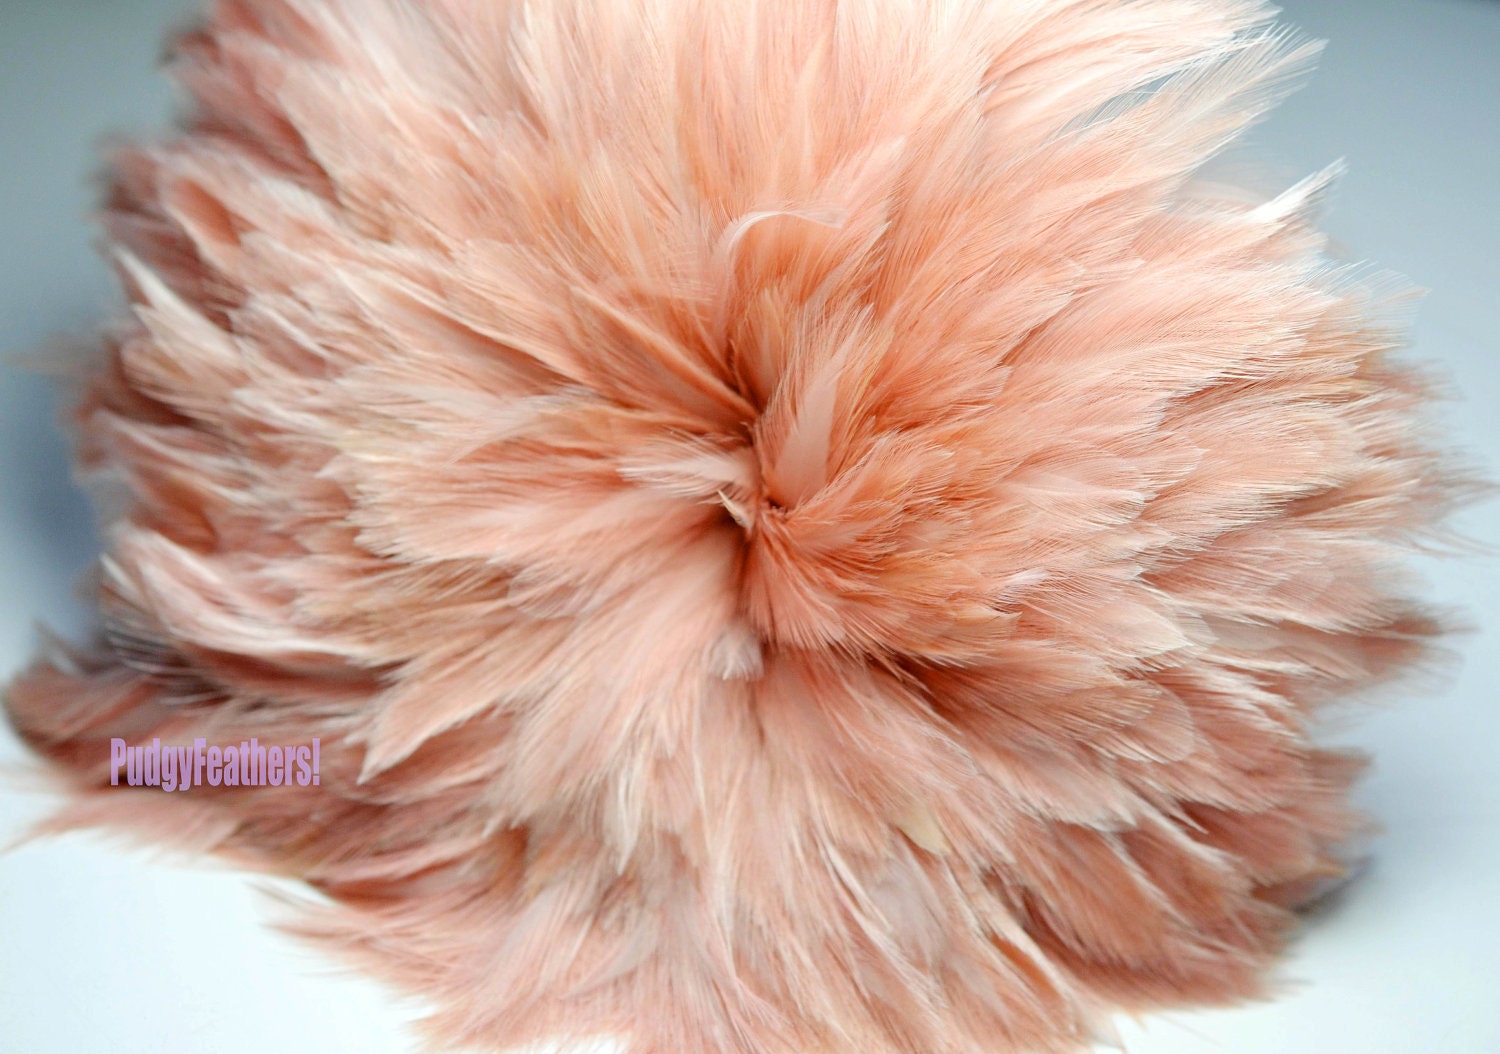 Beautiful Light Flamingo Pink Dyed Rooster Hackle Feathers 4 to 6 inches long -2 Inch Strip - PudgyFeathers